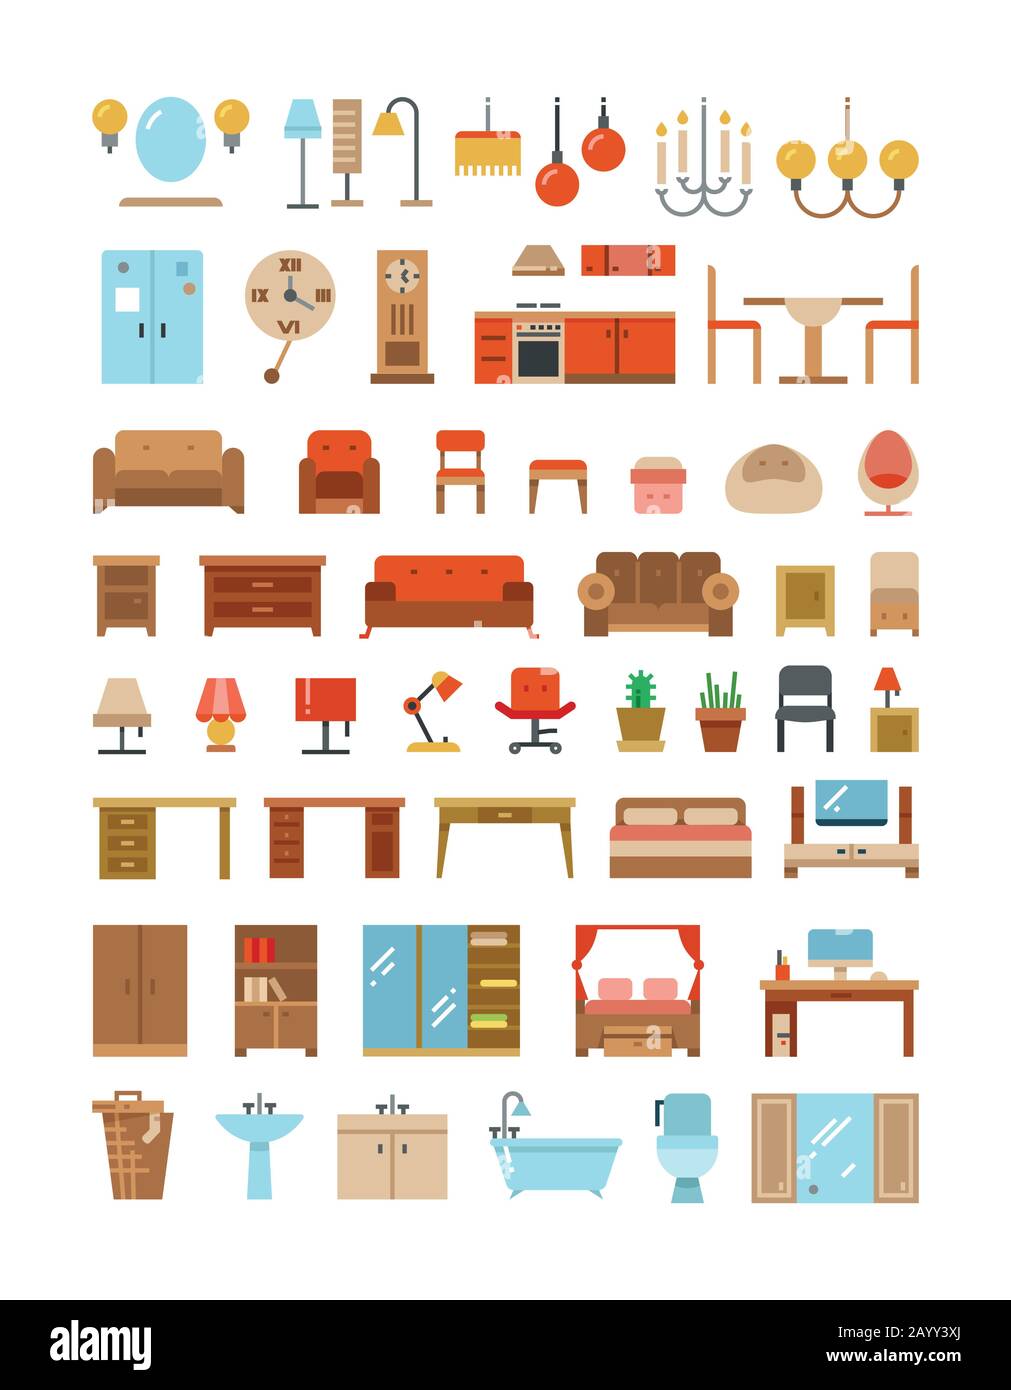 Home and office furniture interiors flat icons set. Furniture for home and office, furniture table sofa and armchair. Vector illustration Stock Vector